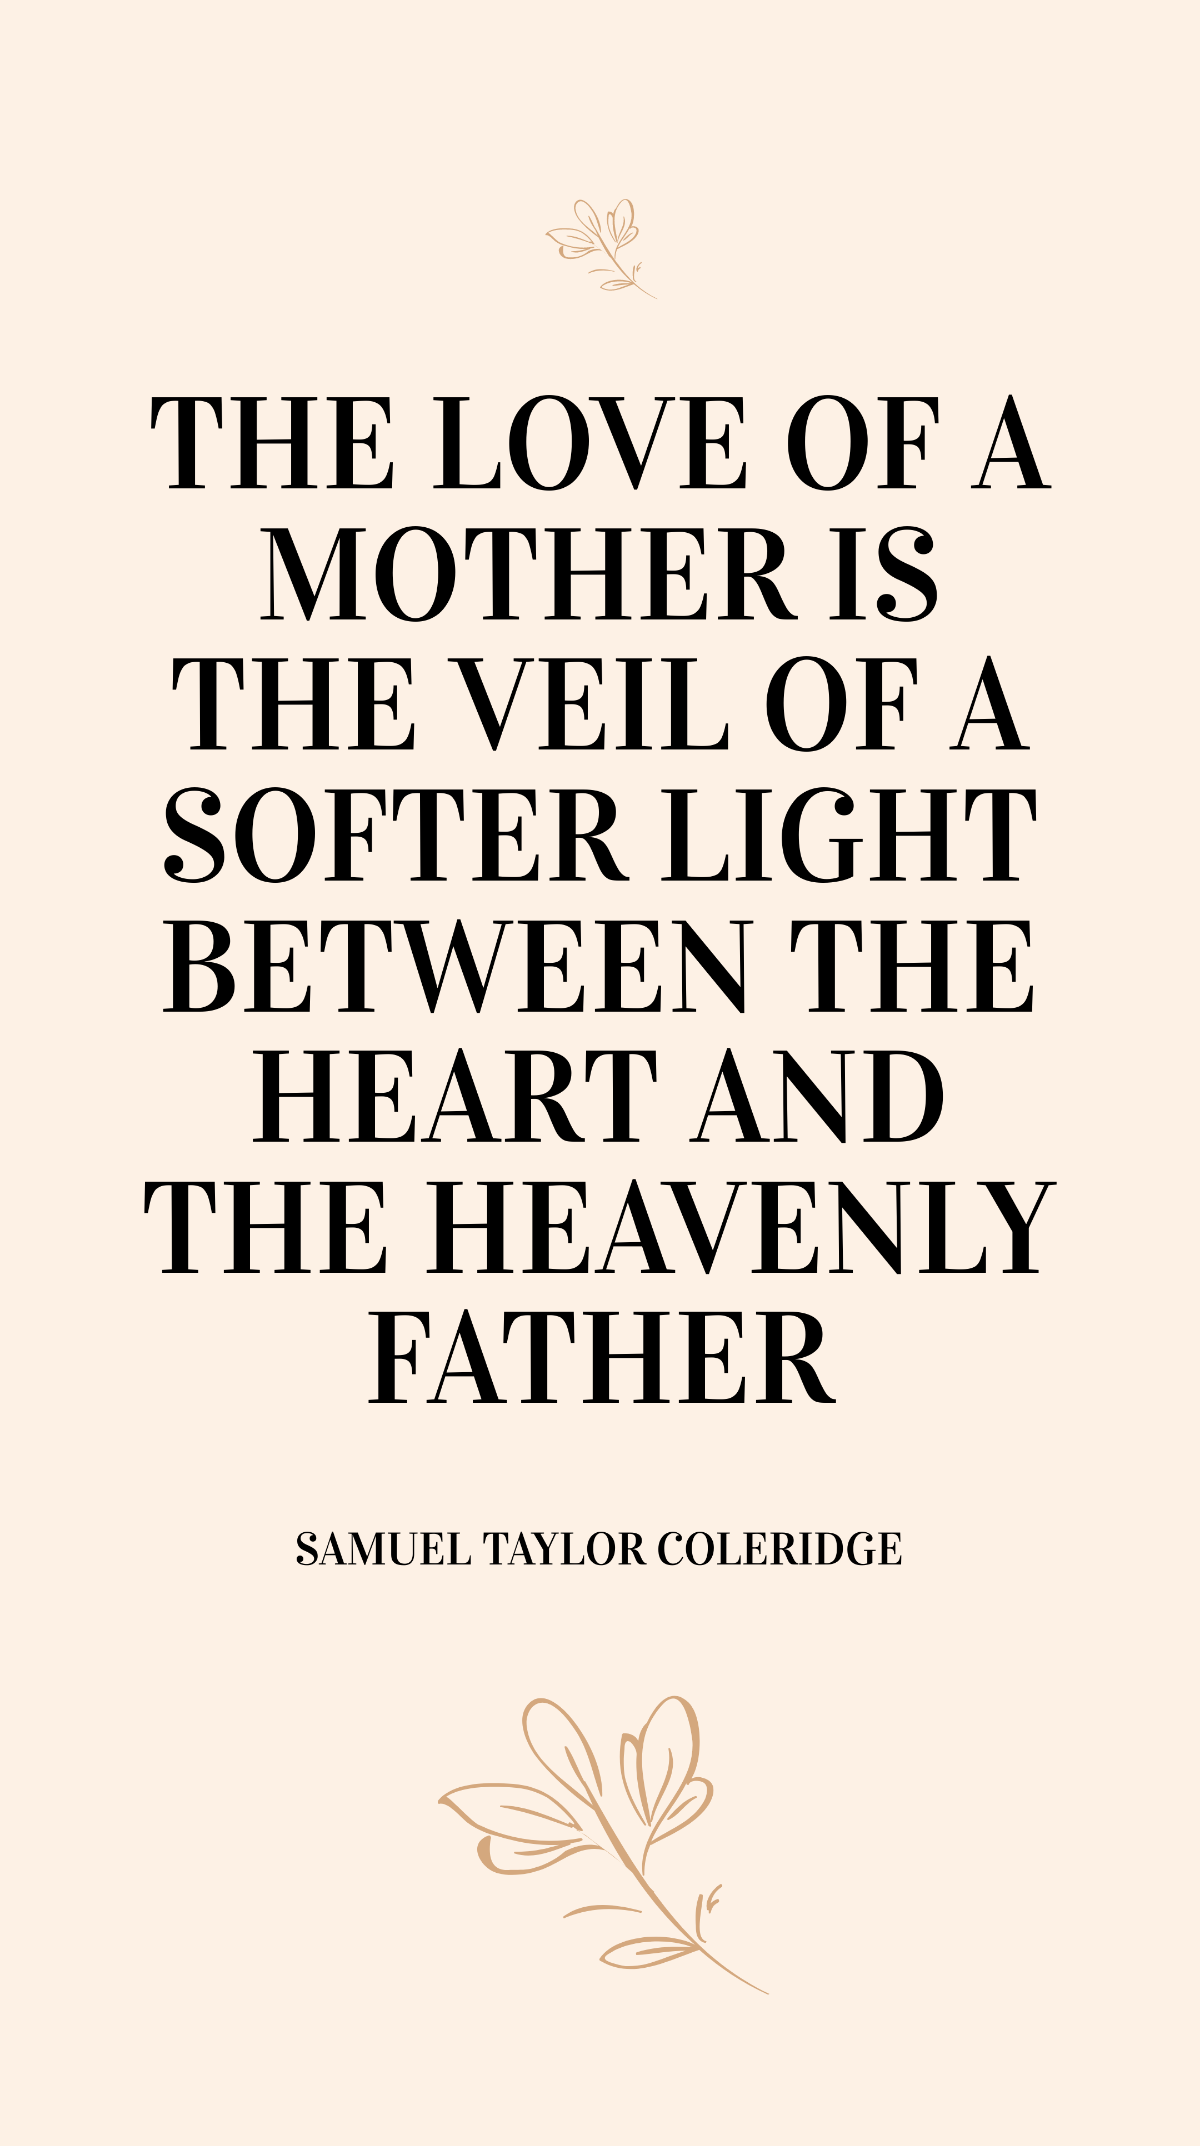 Samuel Taylor Coleridge - The love of a mother is the veil of a softer light between the heart and the heavenly Father.  Template